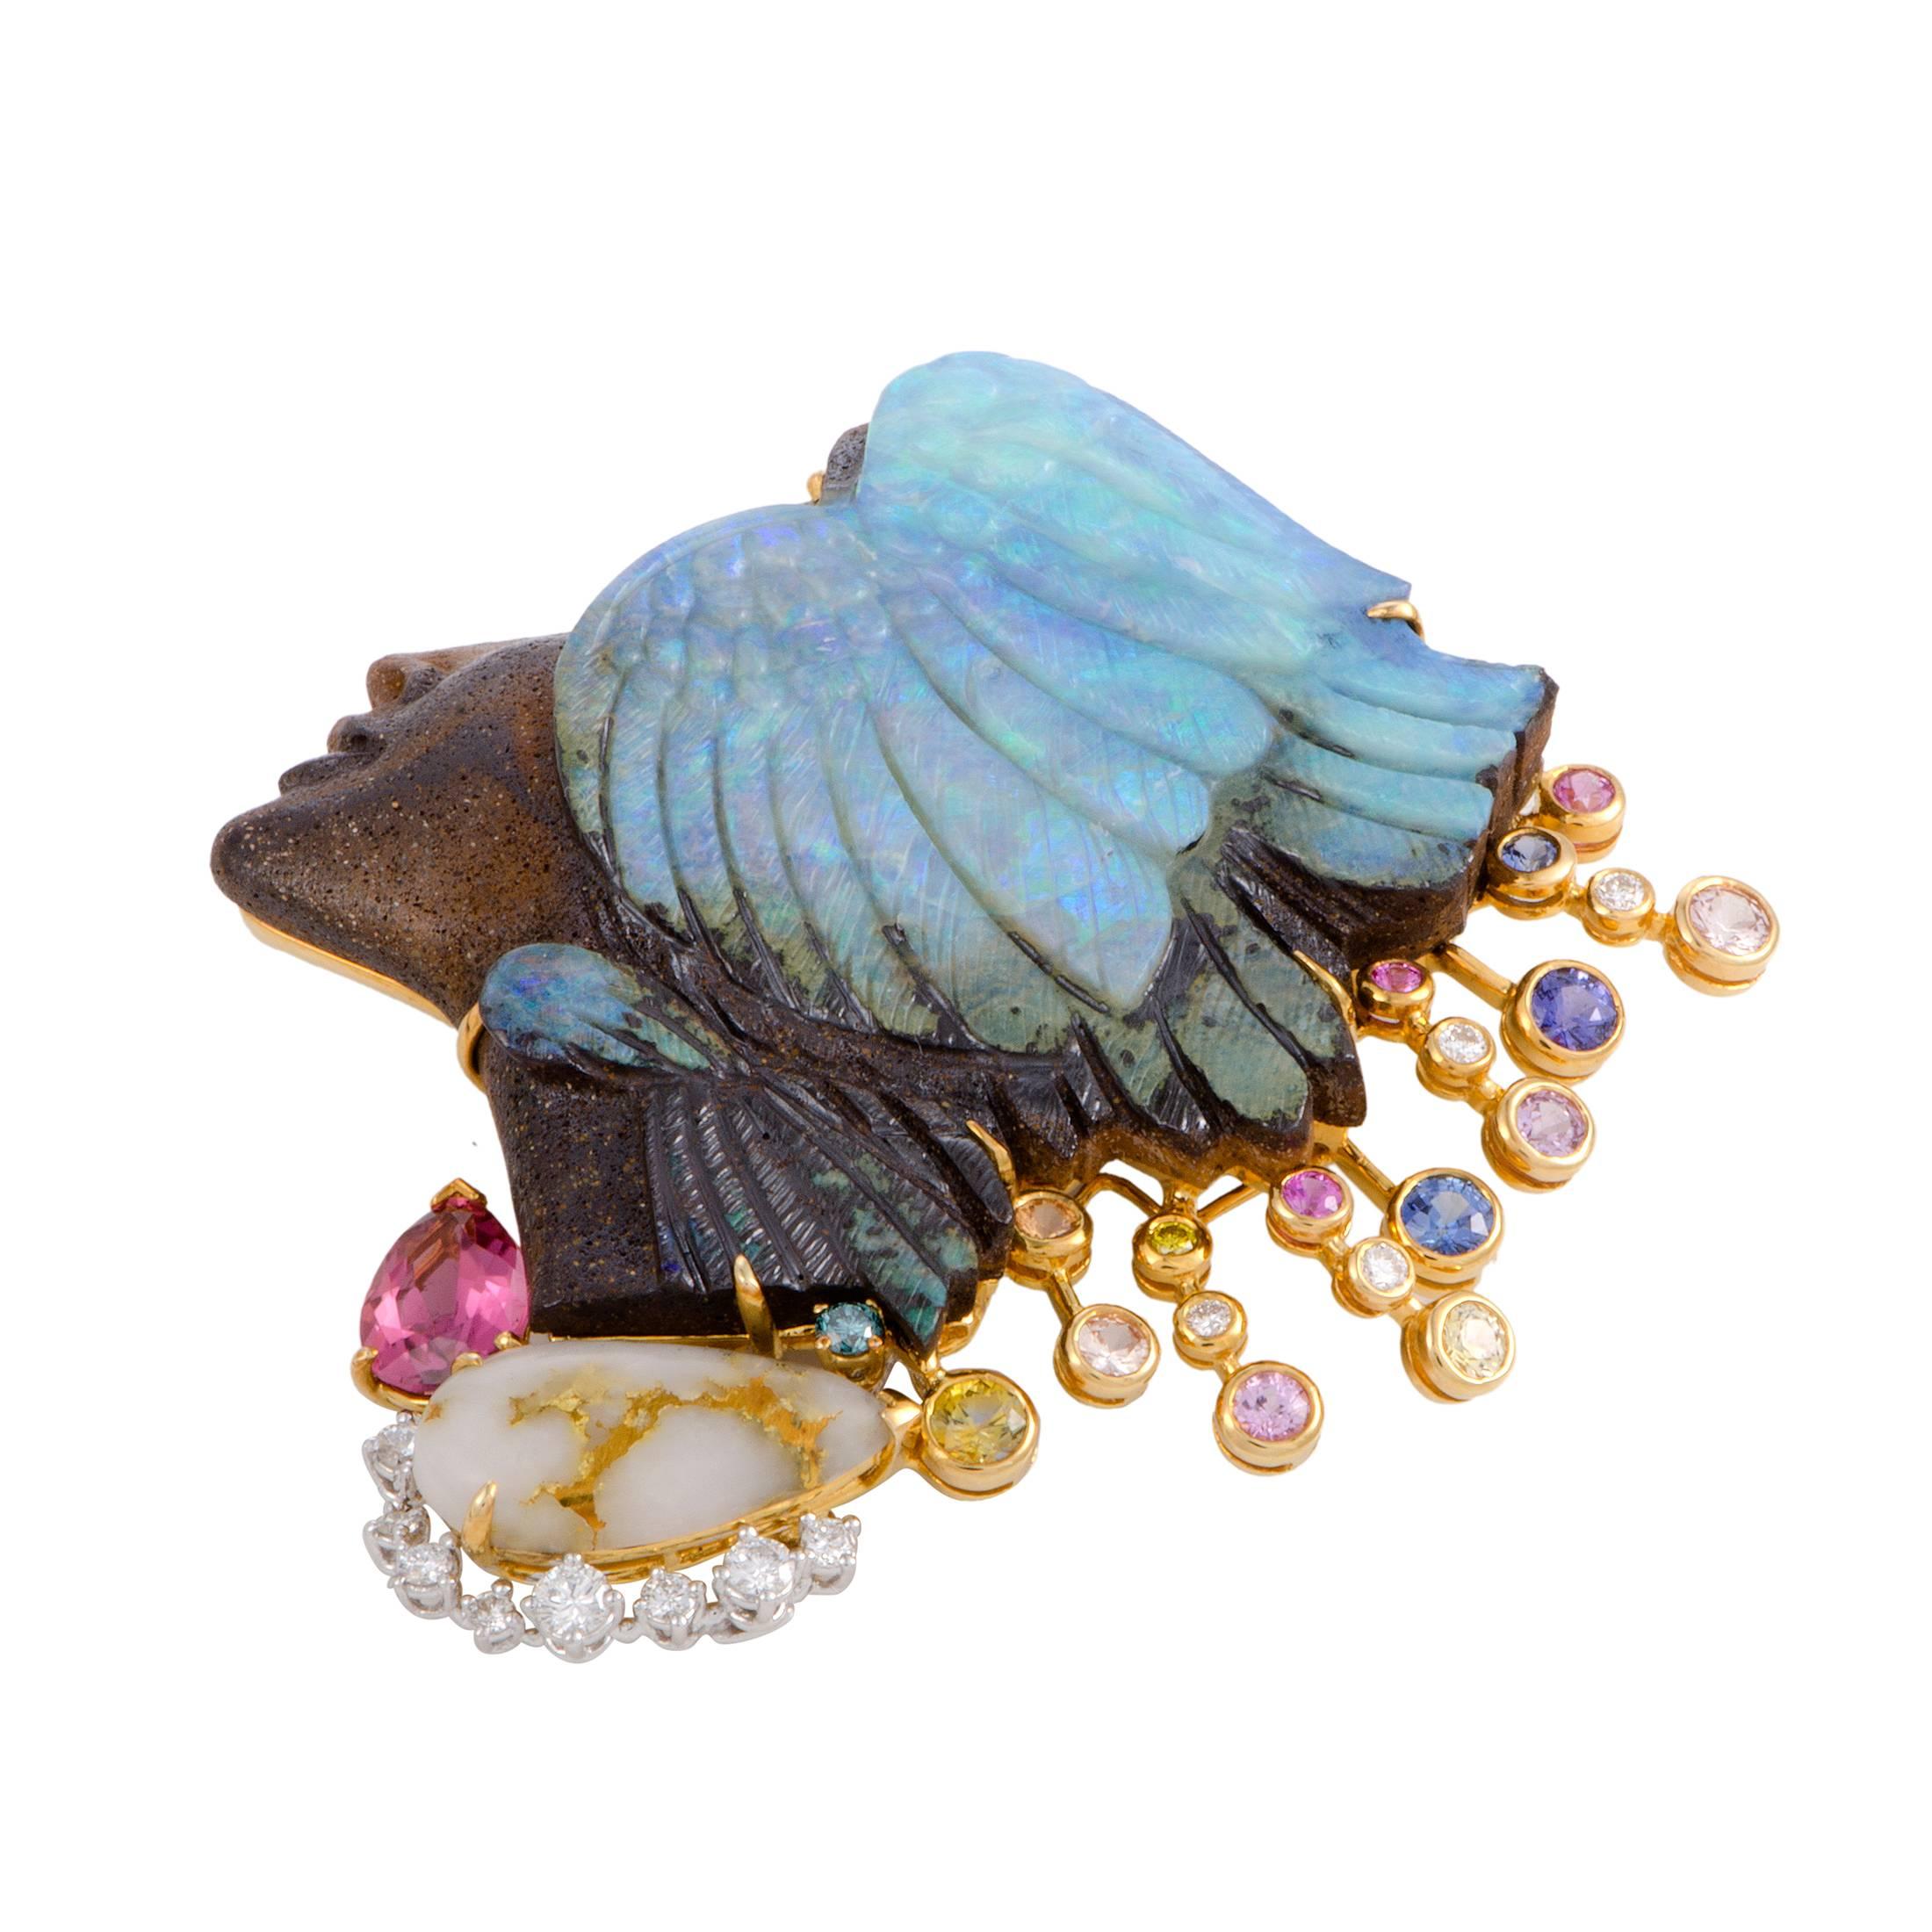 A plethora of diverse stones and colors creates a stunning visual effect in this eye-catching brooch that depicts a lady’s profile in an incredibly imaginative fashion. Made of 18K yellow gold and platinum, the brooch is decorated with diamond,